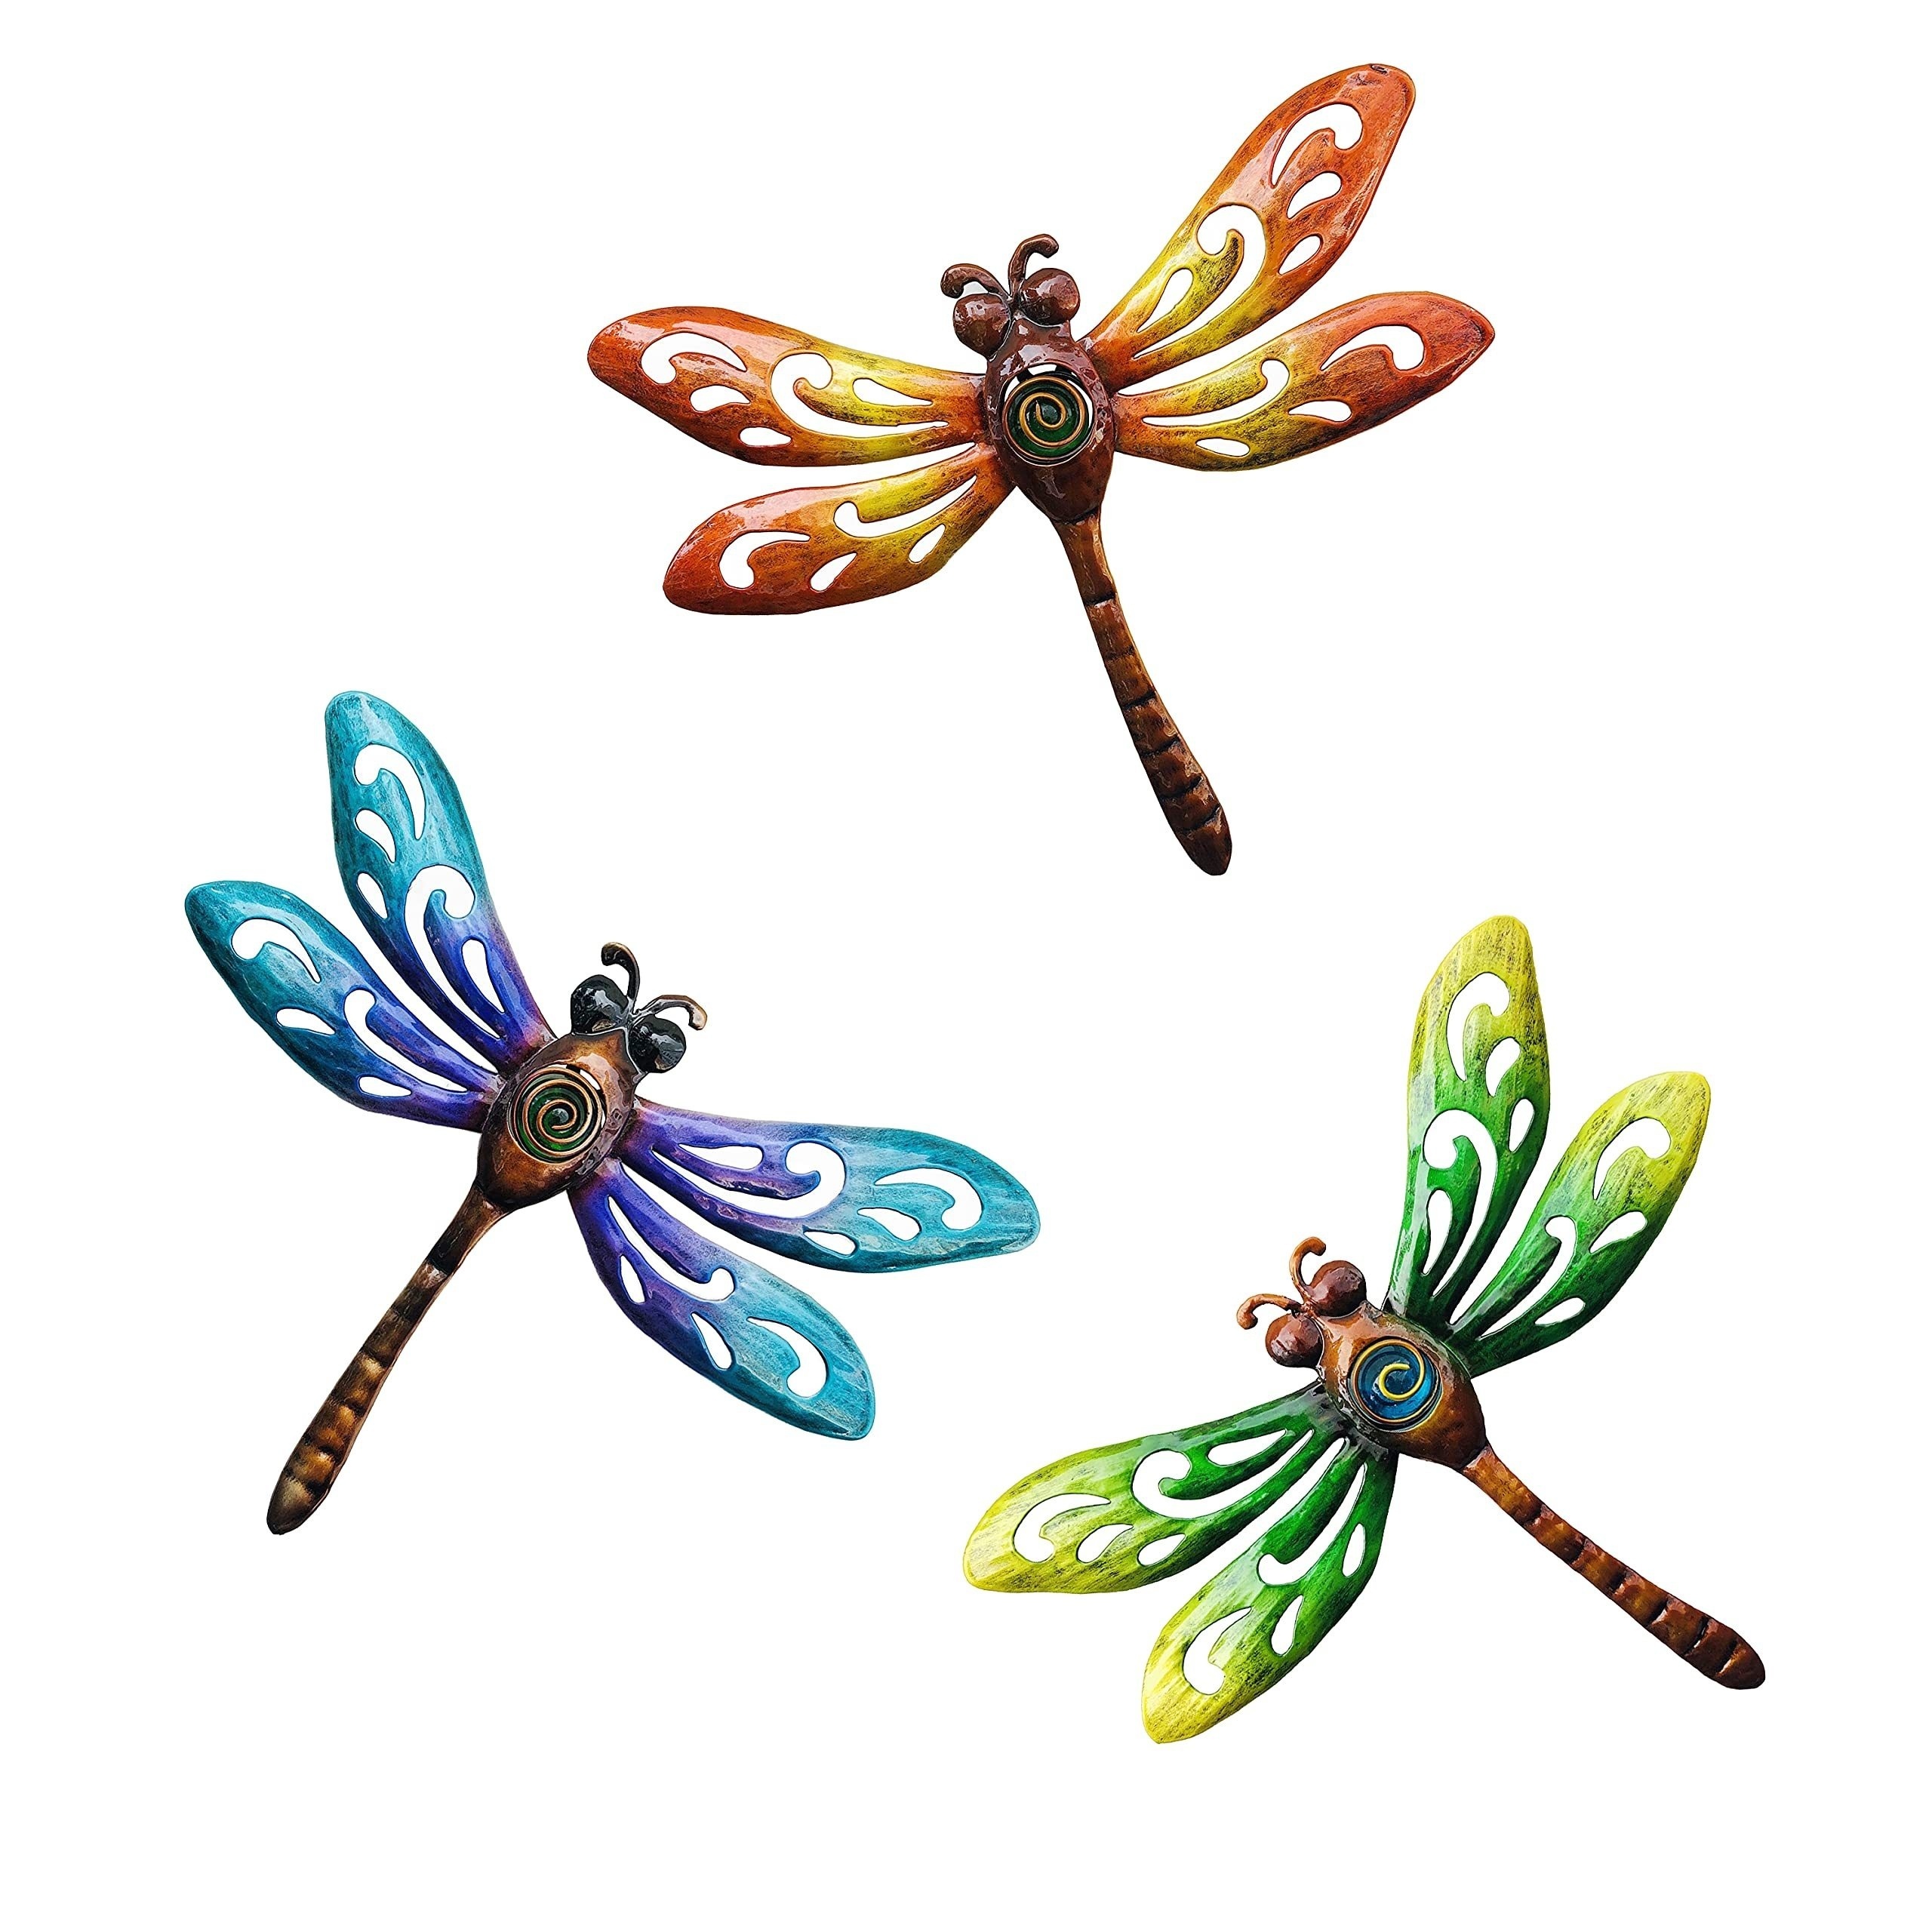 

Beautiful Handmade Dragonfly Metal Wall Art - Perfect For Any Room Or Outdoor Space!